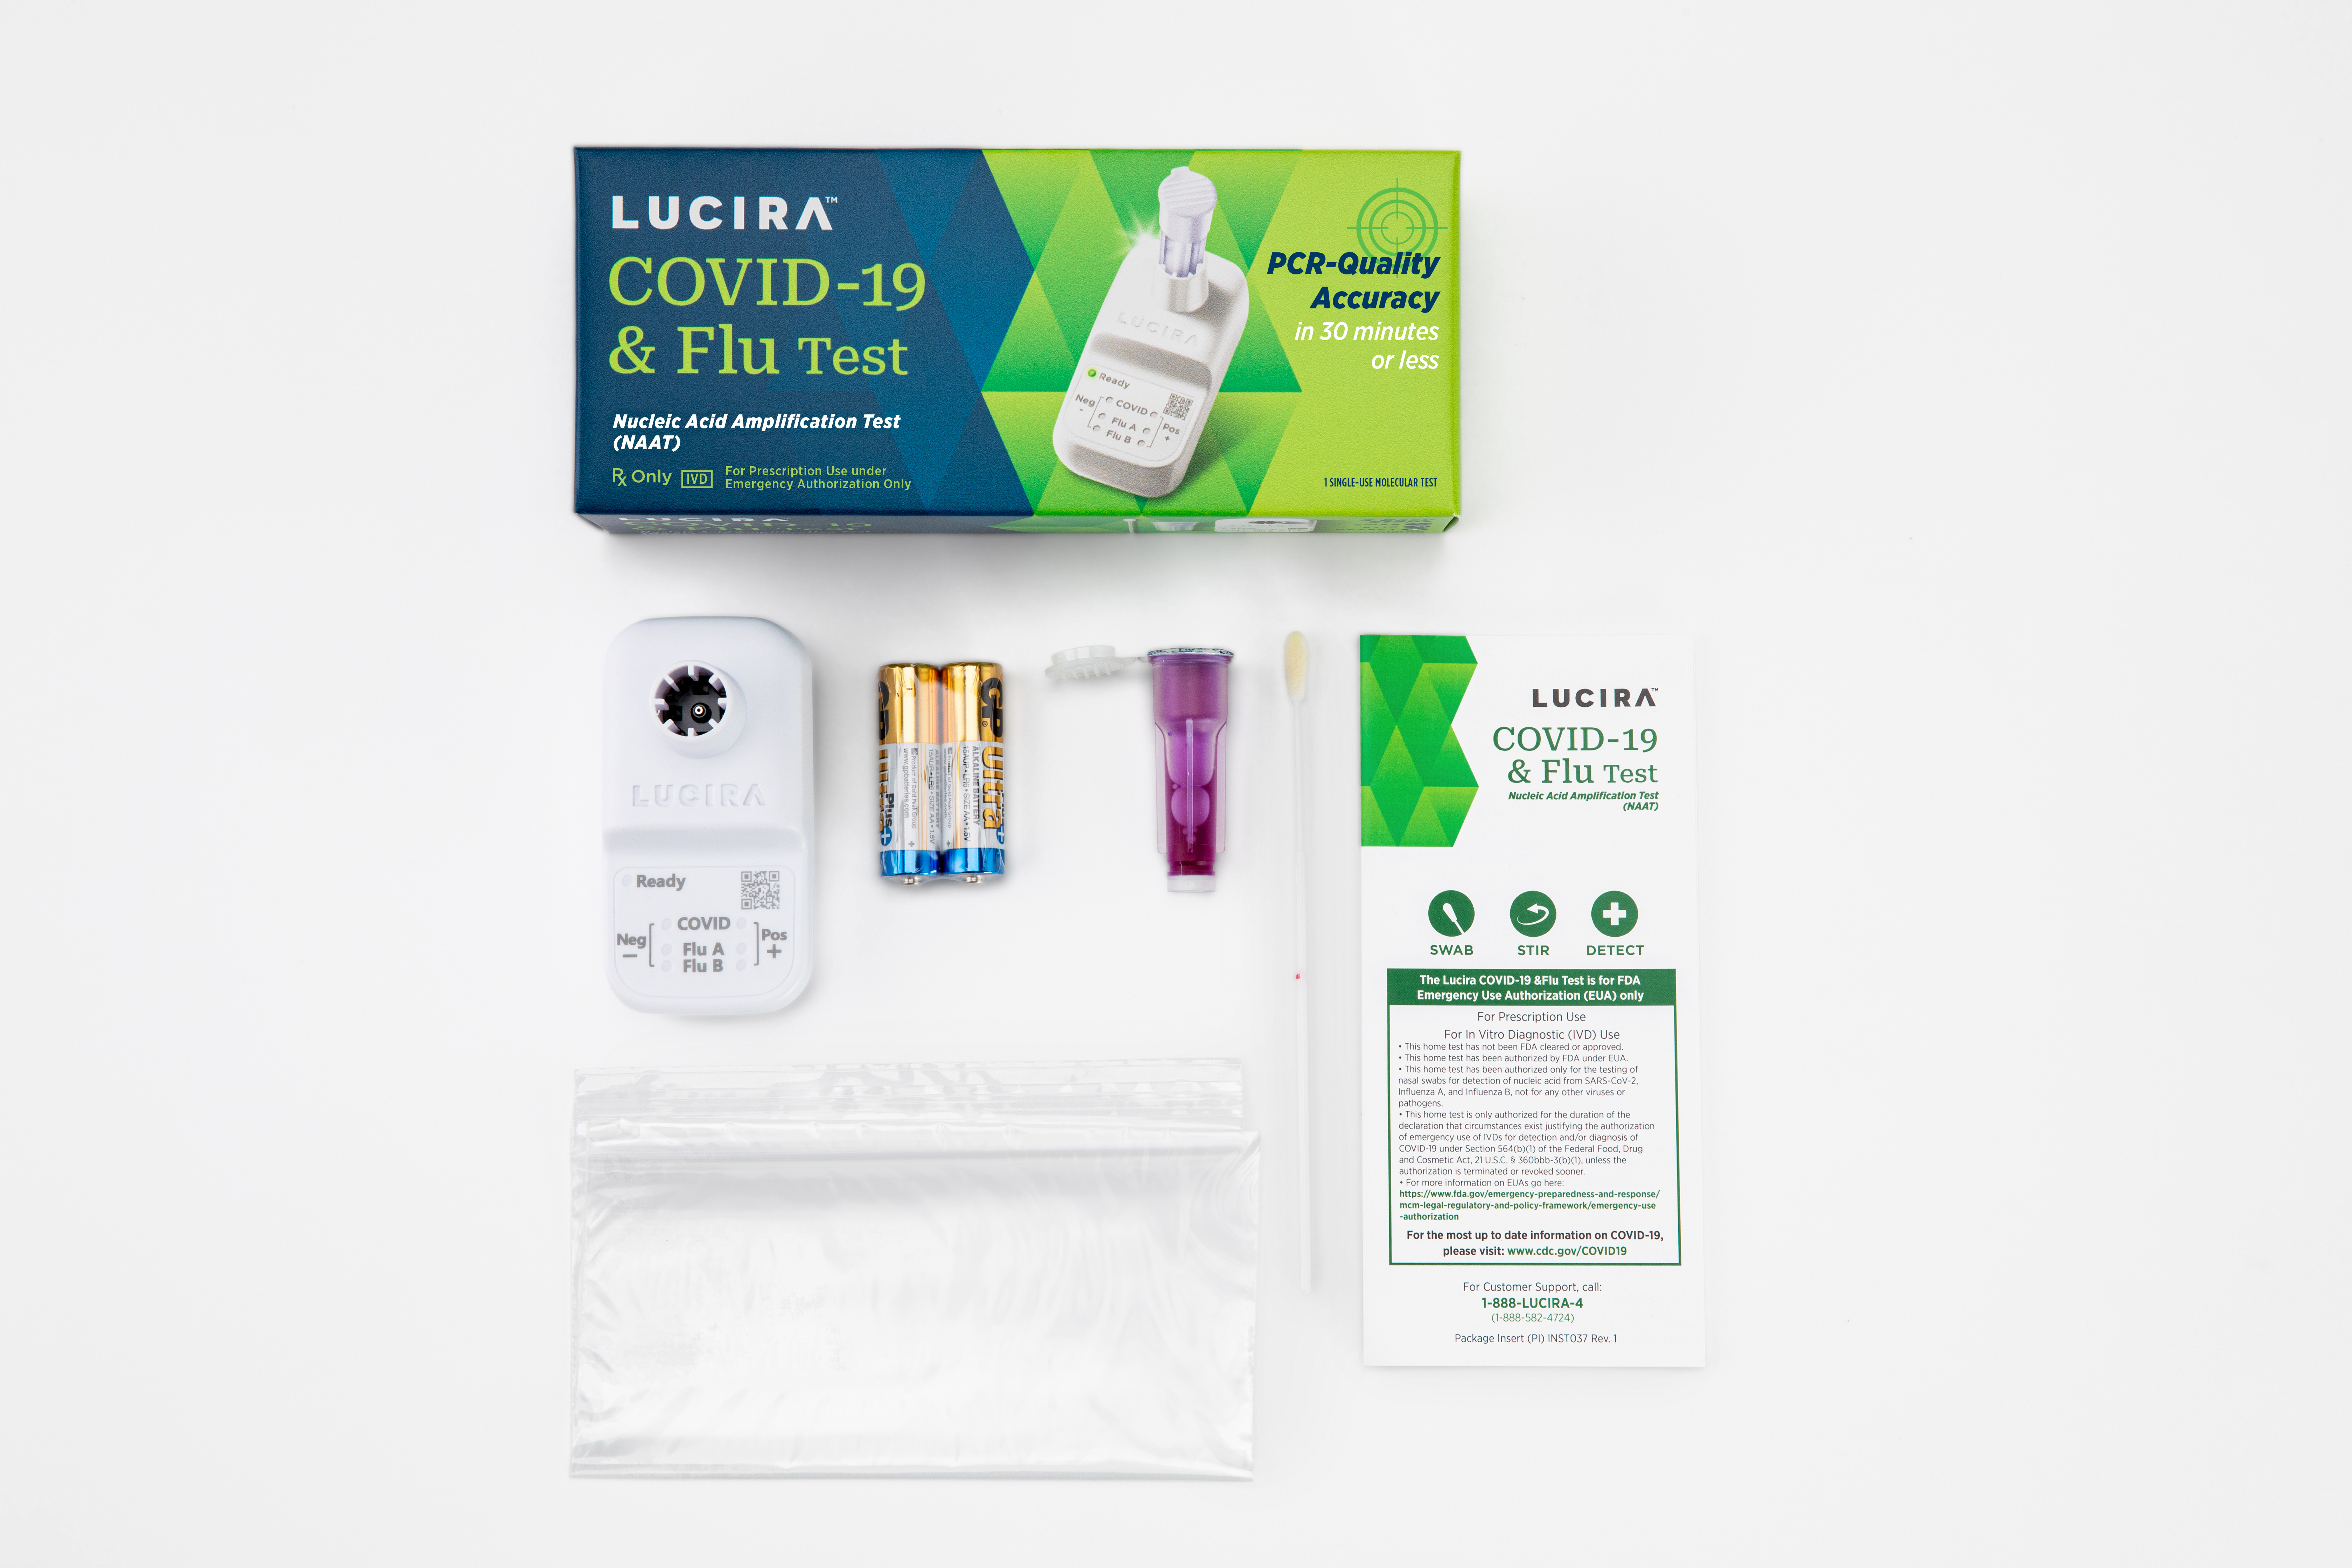 Lucira COVID-19 &amp; Flu Test – All That Is Needed to Answer “Is it Covid or the Flu?”